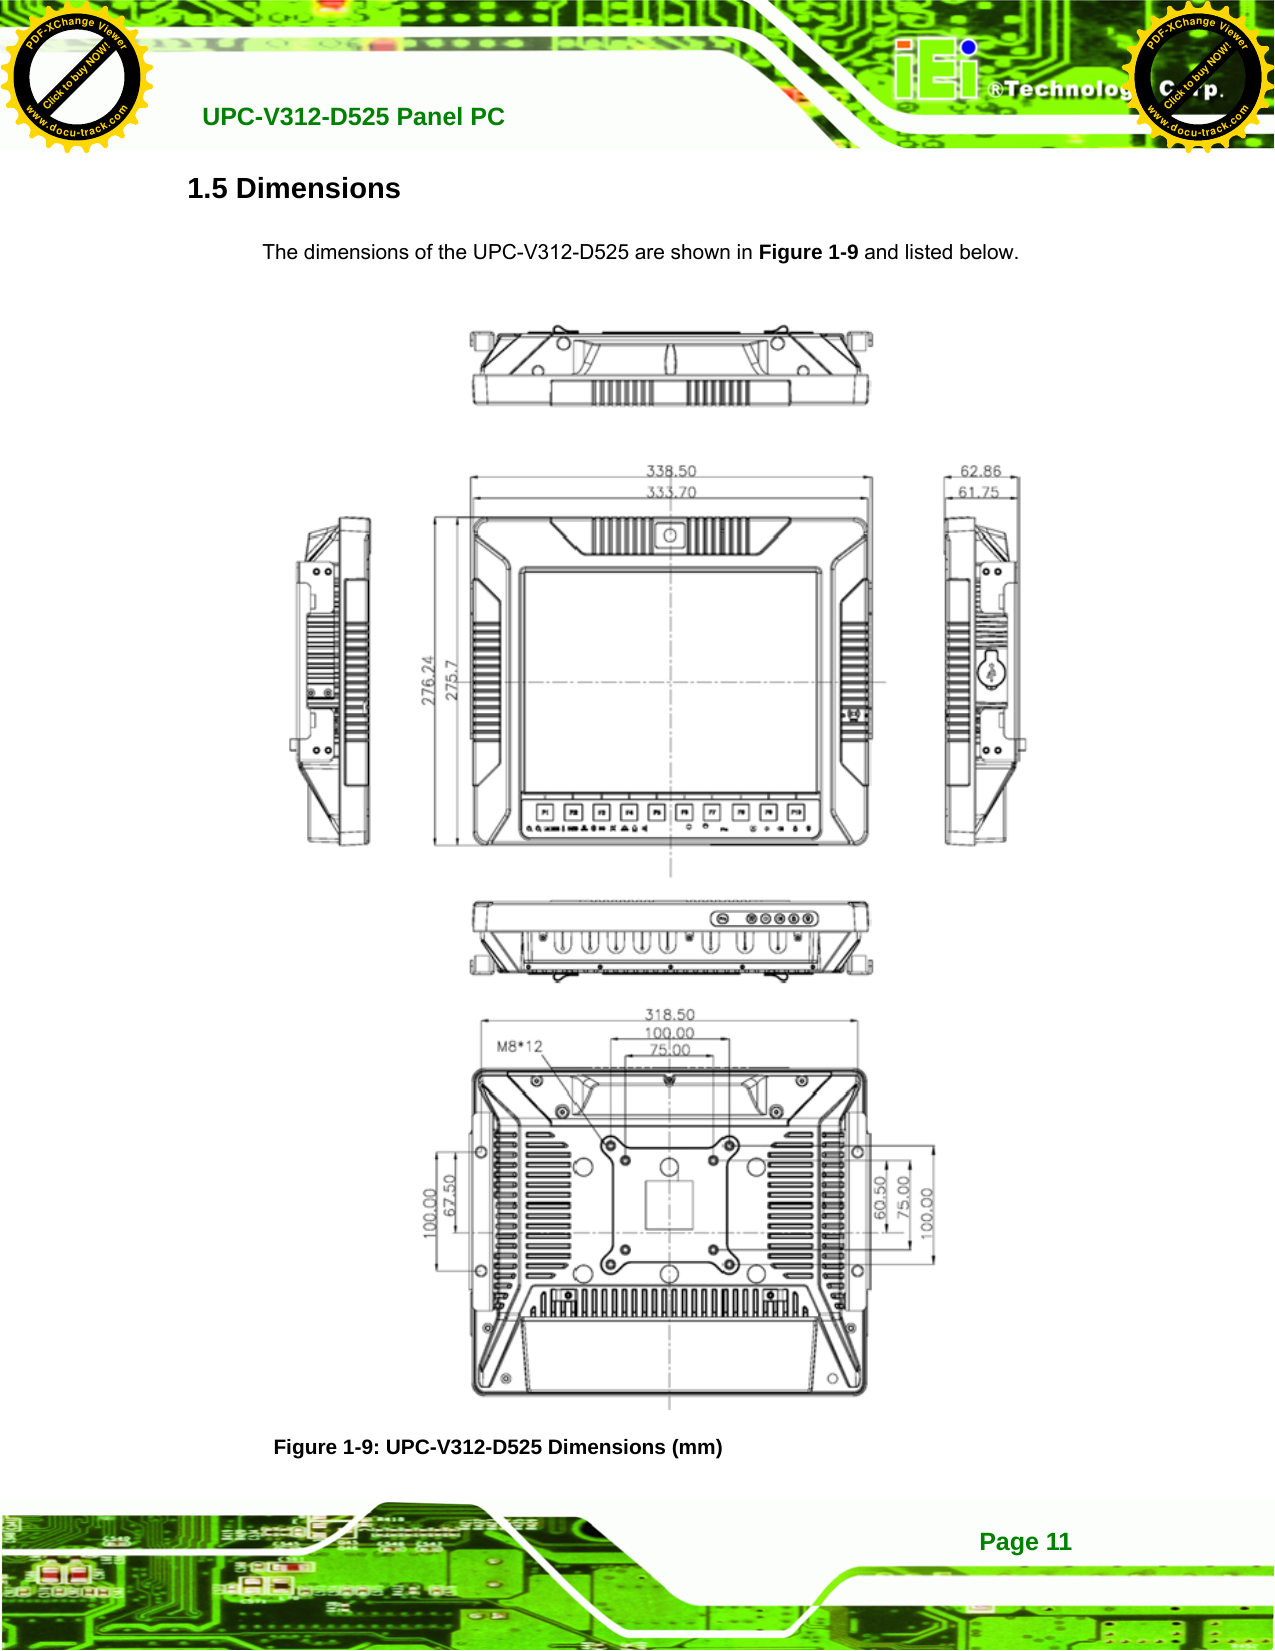   UPC-V312-D525 Panel PC Page 111.5 Dimensions The dimensions of the UPC-V312-D525 are shown in 55Figure 1-9 and listed below.  Figure 1-9: UPC-V312-D525 Dimensions (mm) Click to buy NOW!PDF-XChange Viewerwww.docu-track.comClick to buy NOW!PDF-XChange Viewerwww.docu-track.com